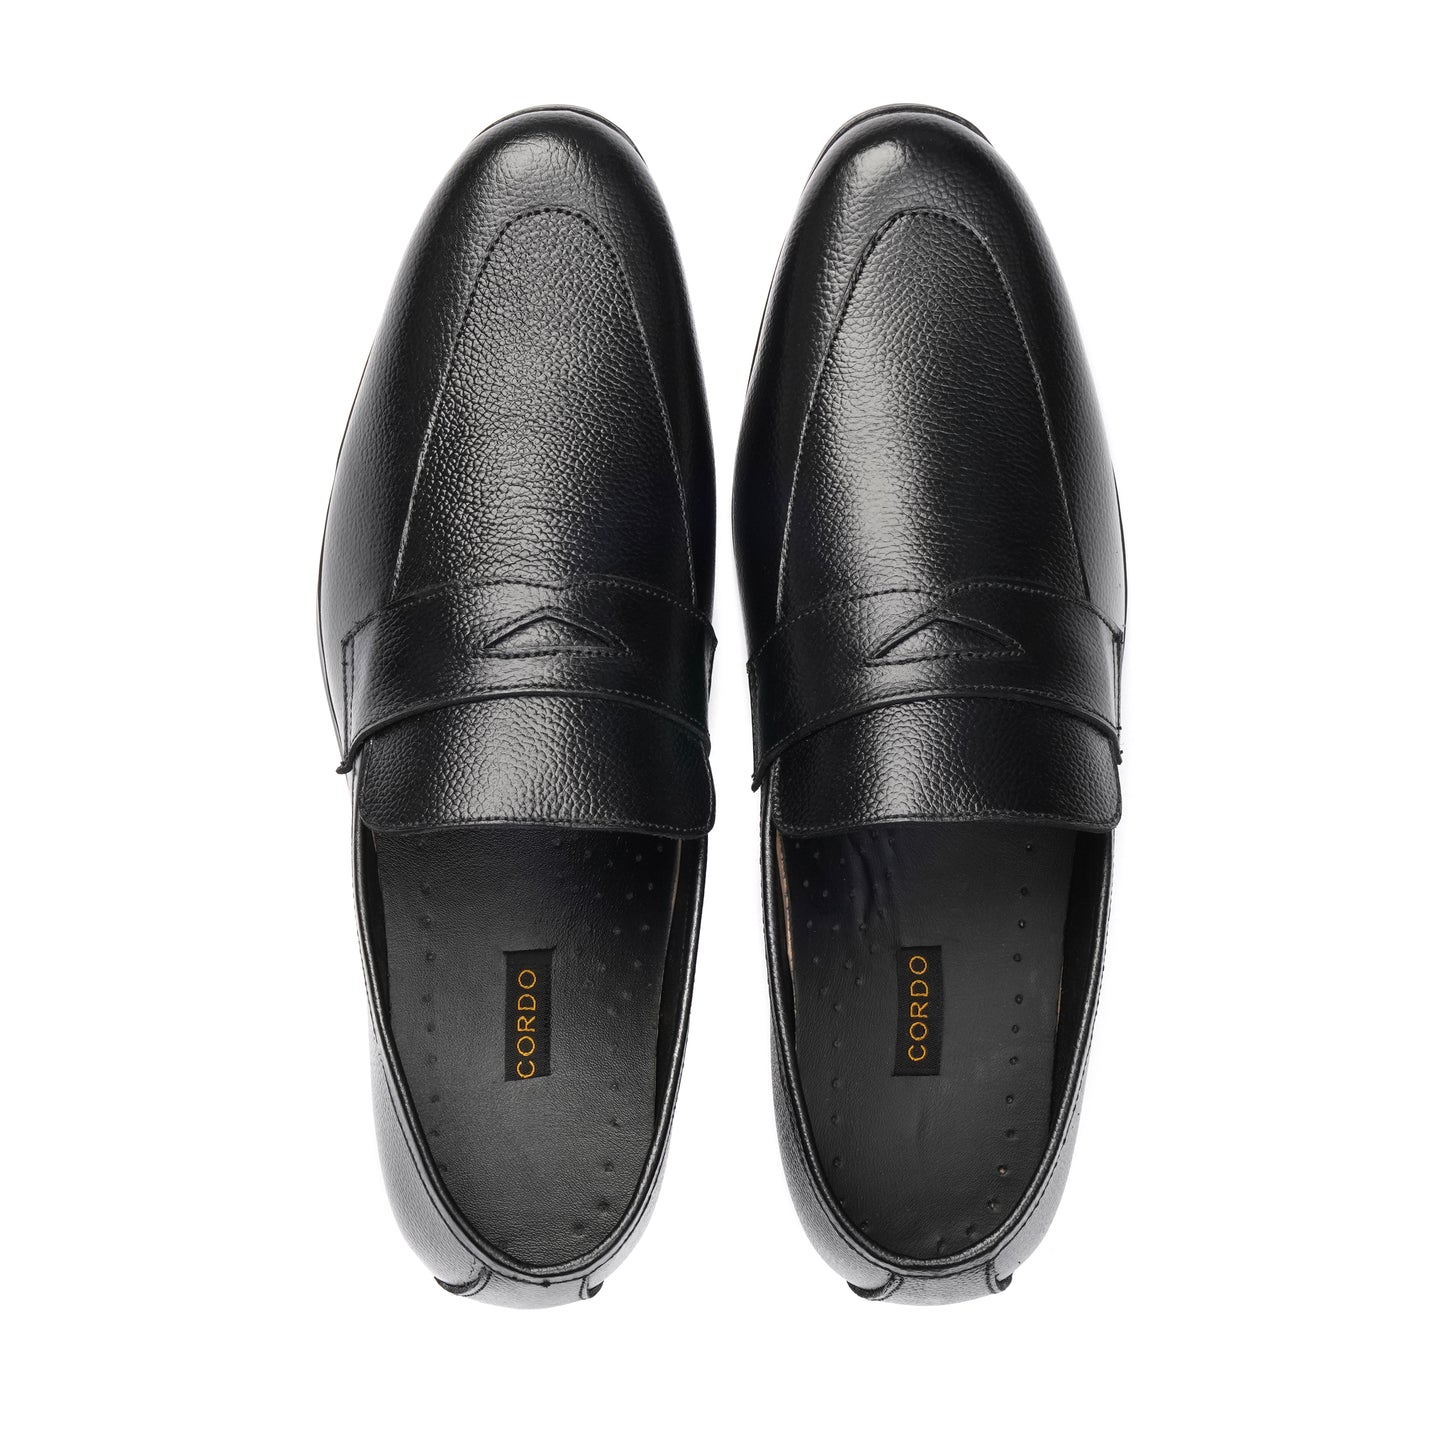 CS-13 Soft Grain Penny Loafers | Ultra Comfortable